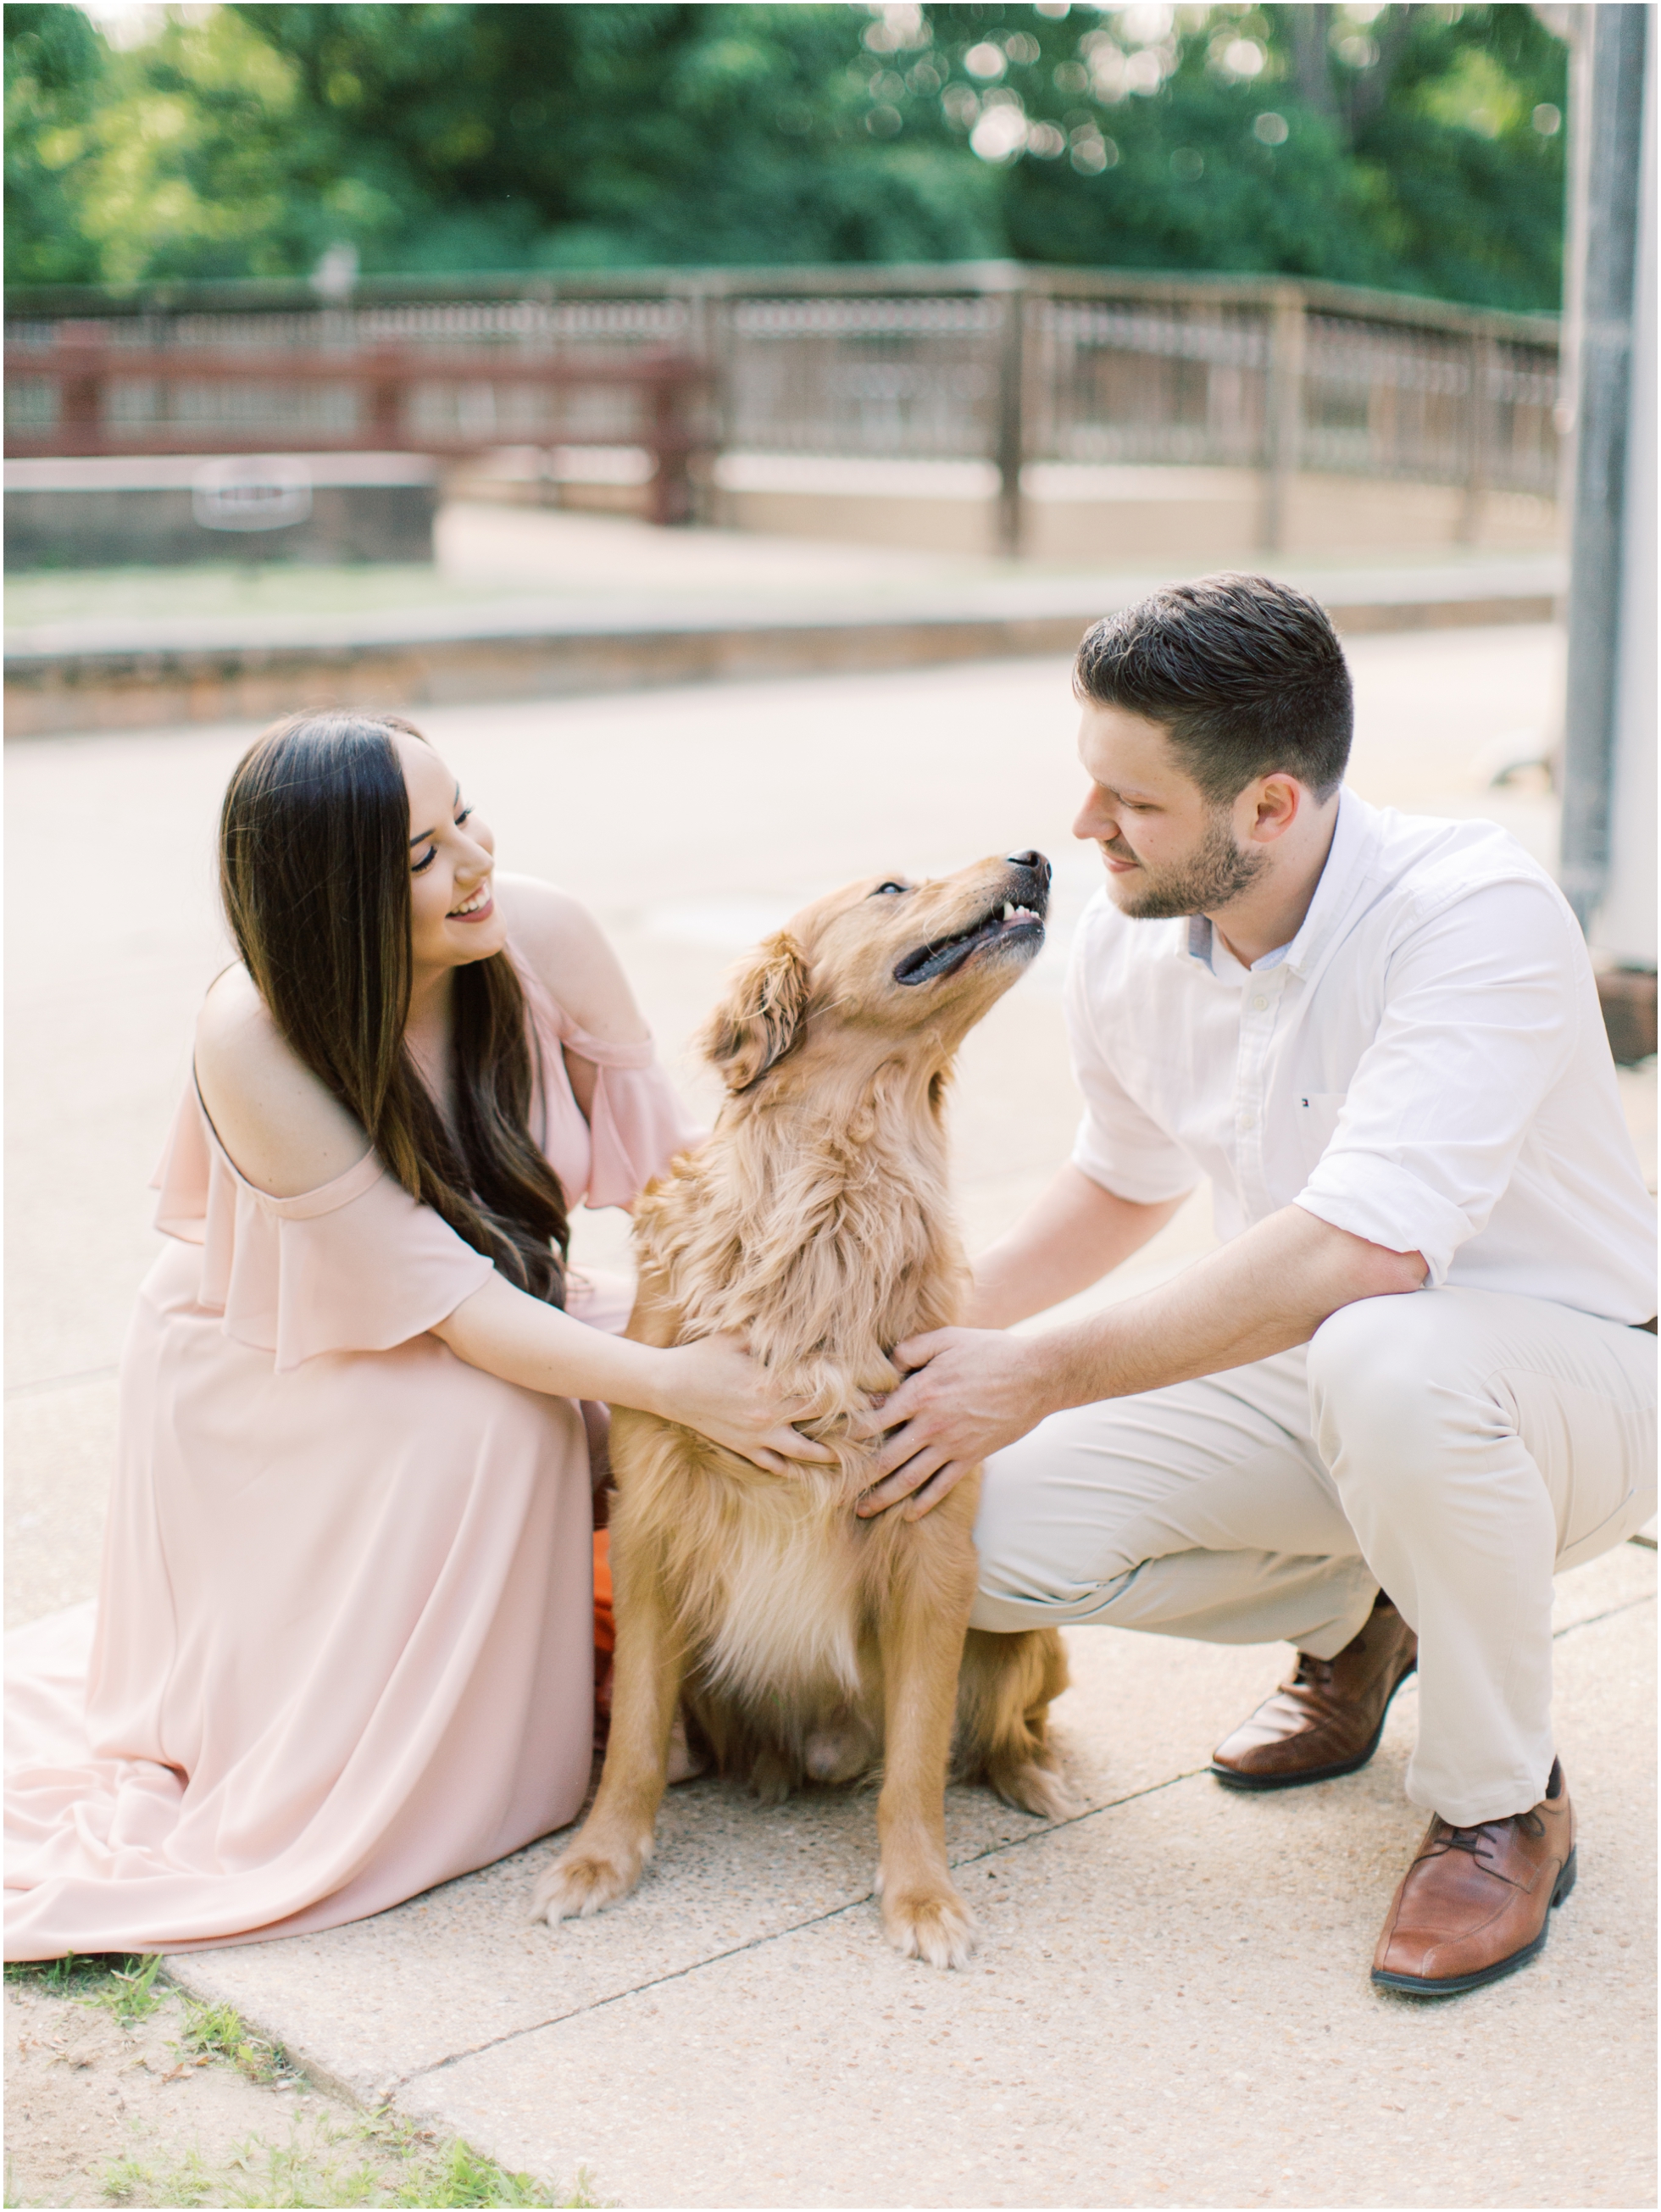 Planning for An Engagement Session with Your Dog